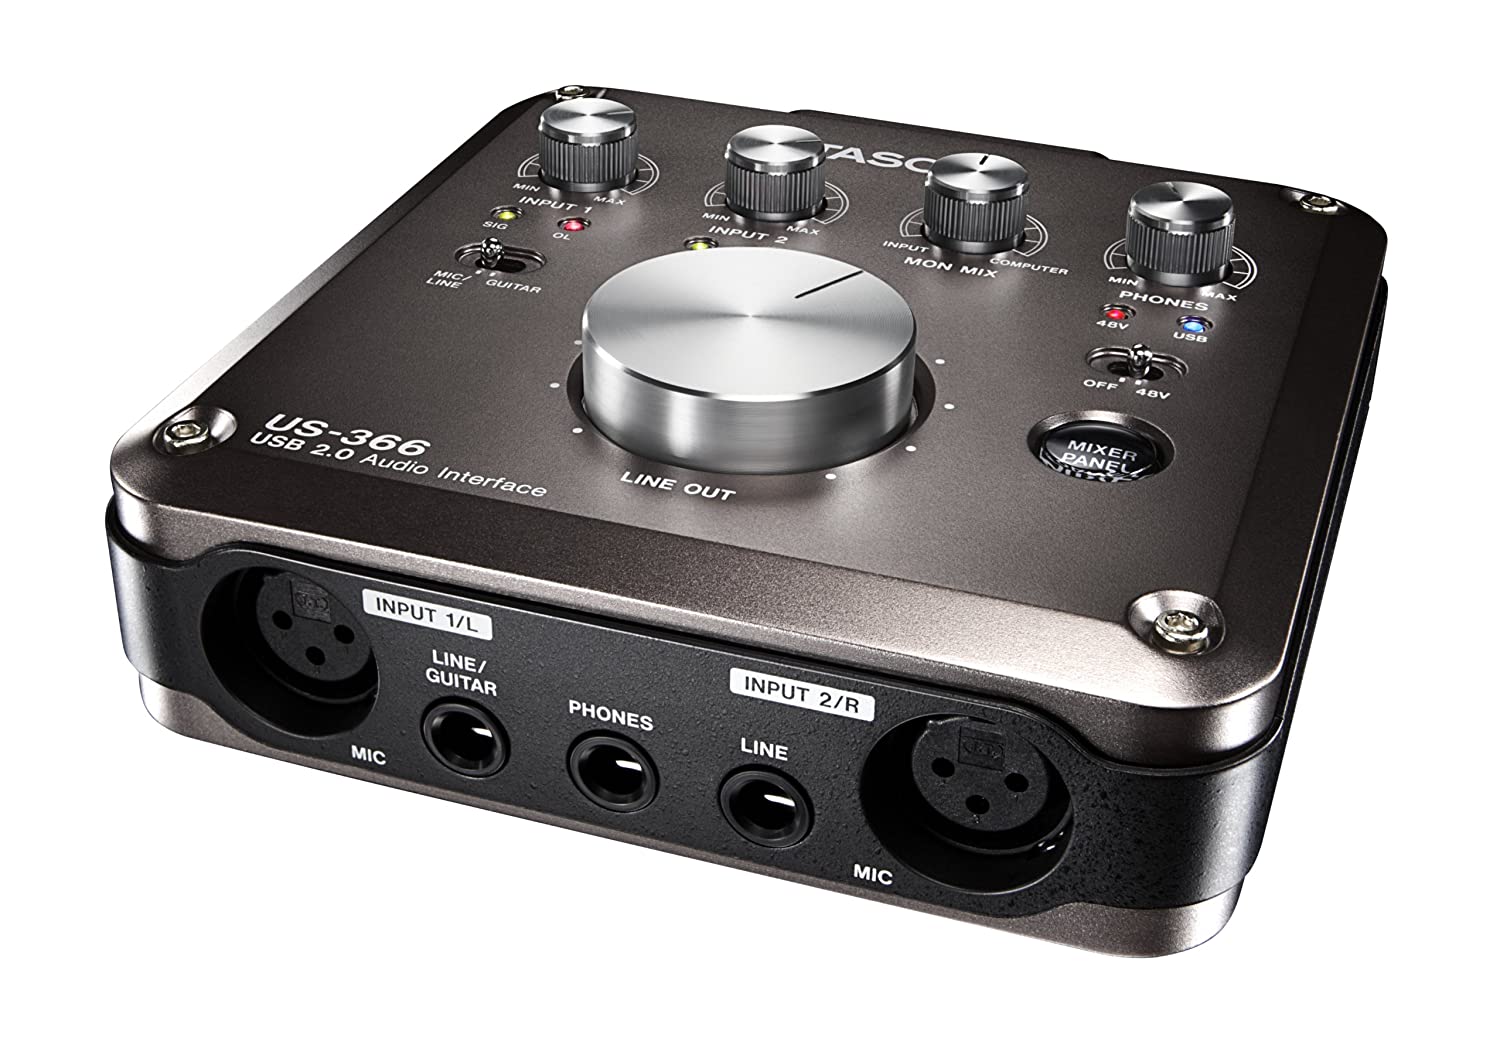 Tascam US 366 USB 2.0 Audio MIDI Interface With DSP Mixer